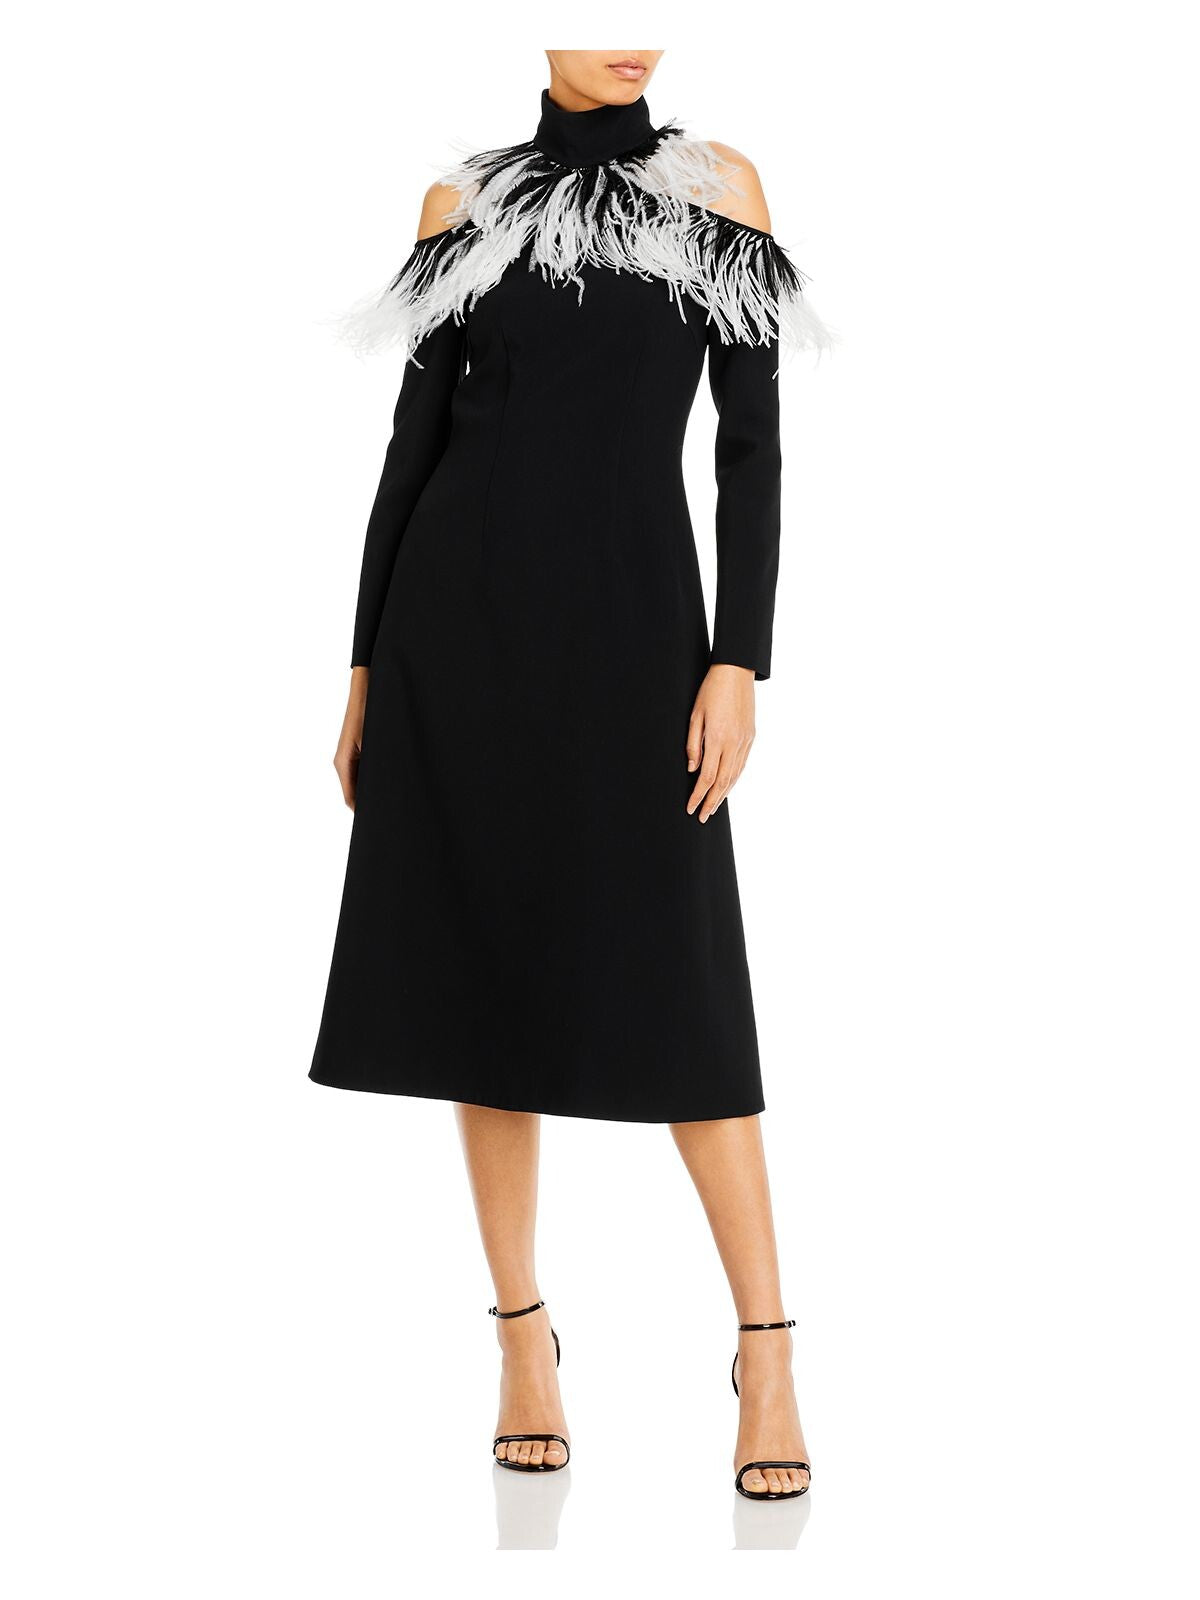 CHRISTOPHER KANE Womens Black Zippered Cold Shoulder Lined Feathered Long Sleeve Turtle Neck Midi Evening Fit + Flare Dress 6